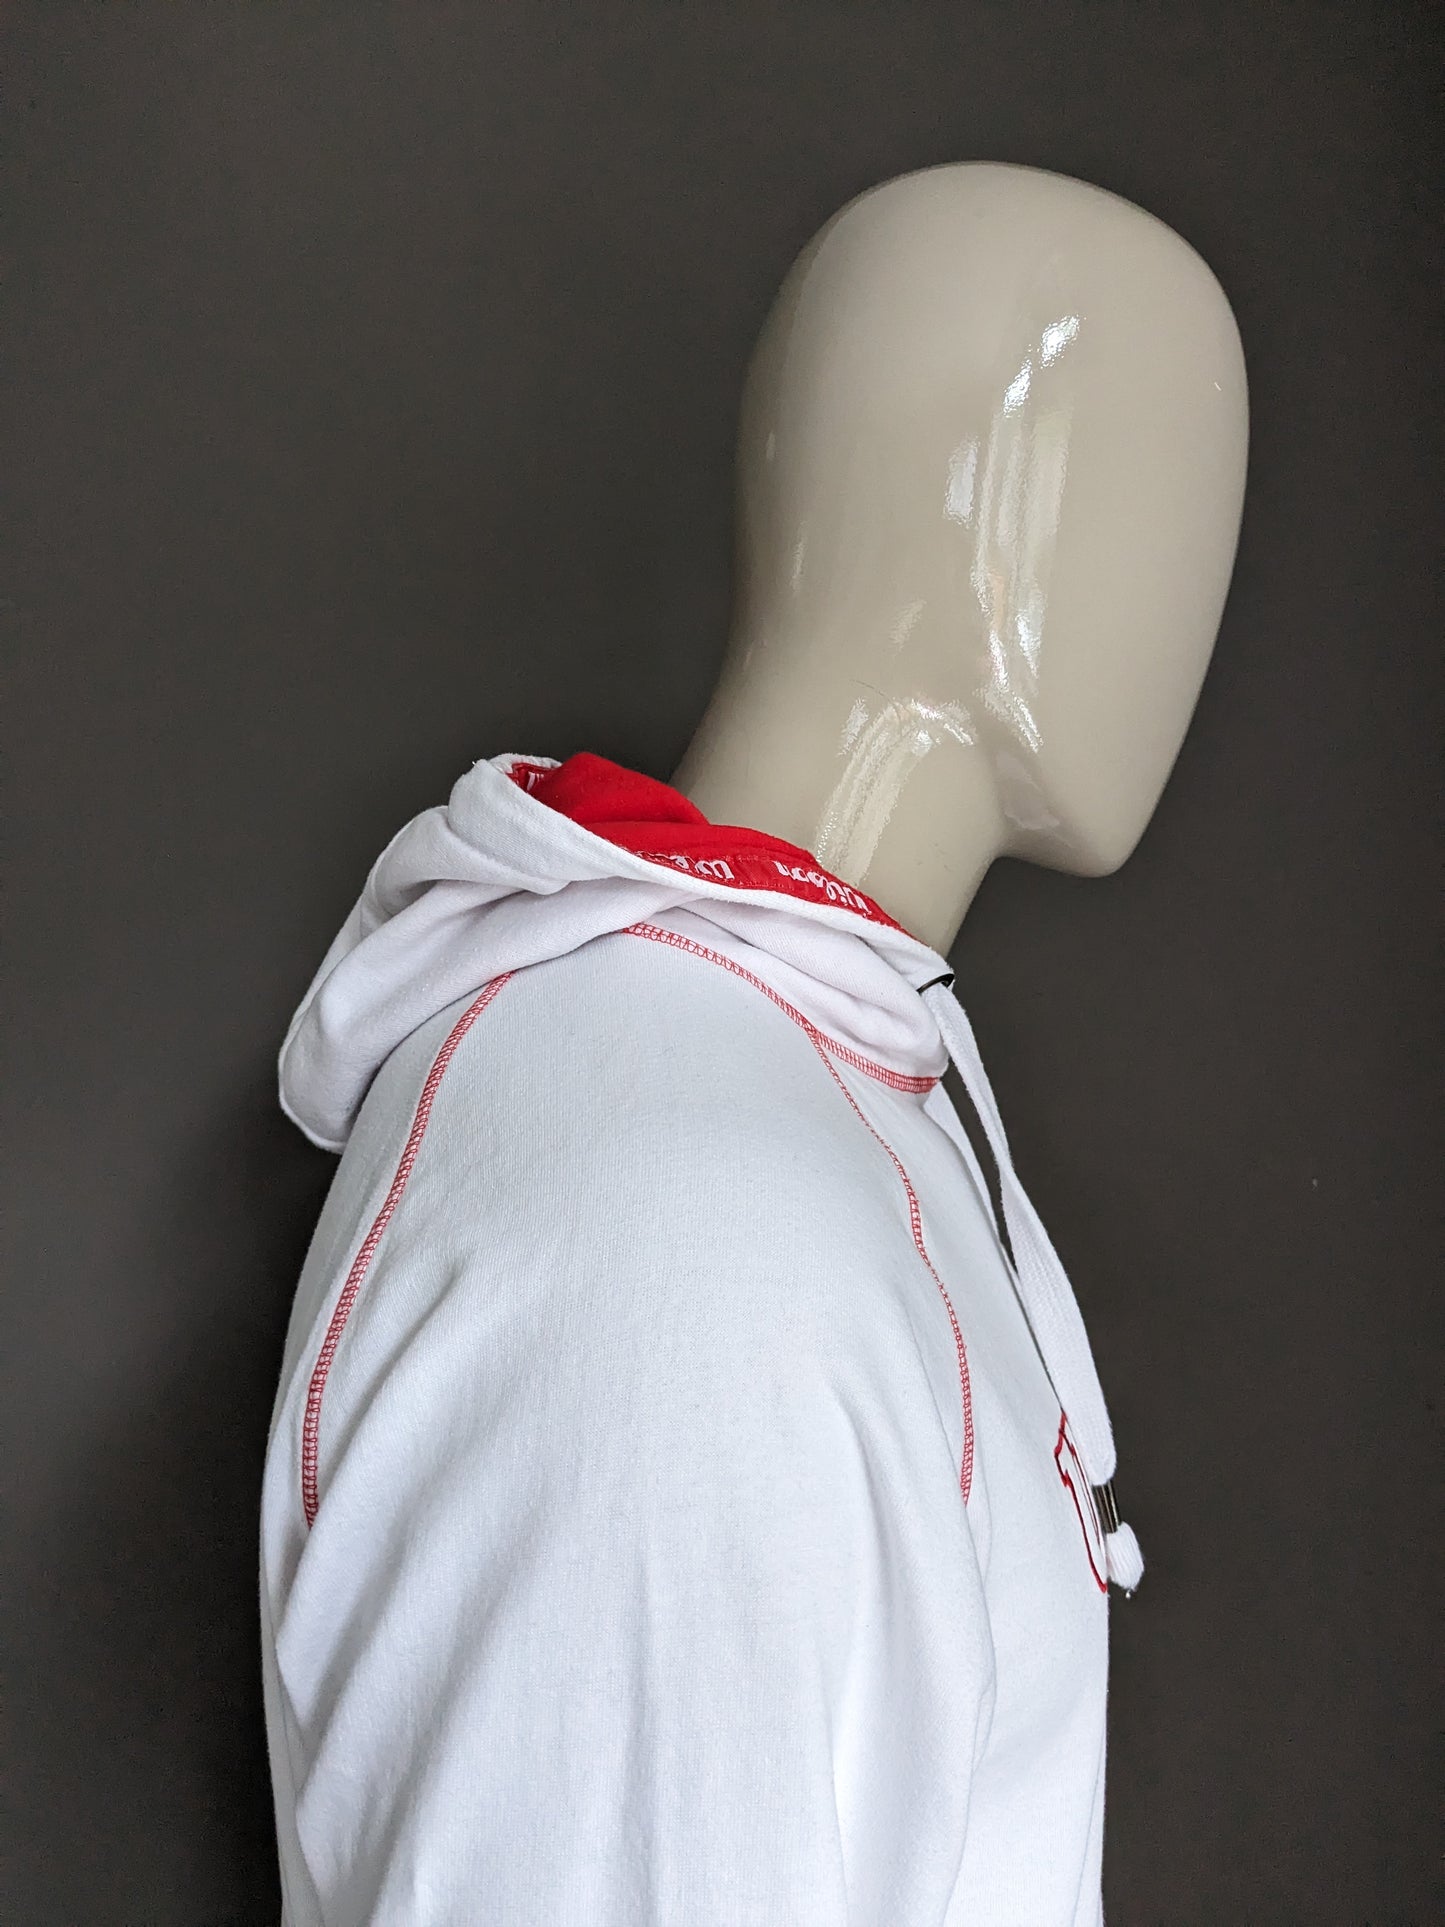 Wilson Hoodie. White Red colored. Size M.